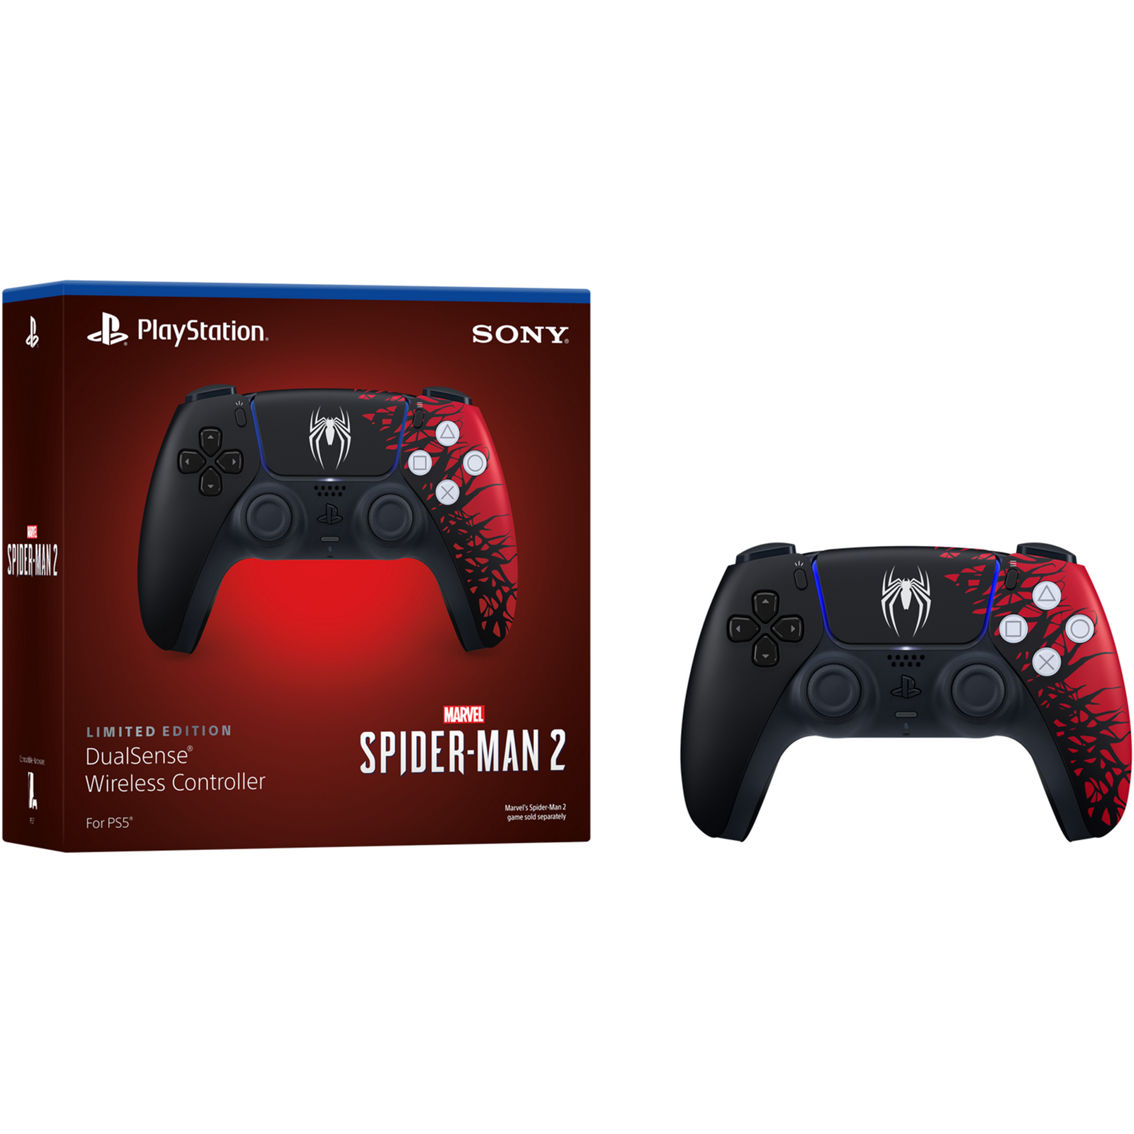 Sony PS5 DualSense Wireless Controller Spider-Man 2 Limited Edition - Image 1 of 2